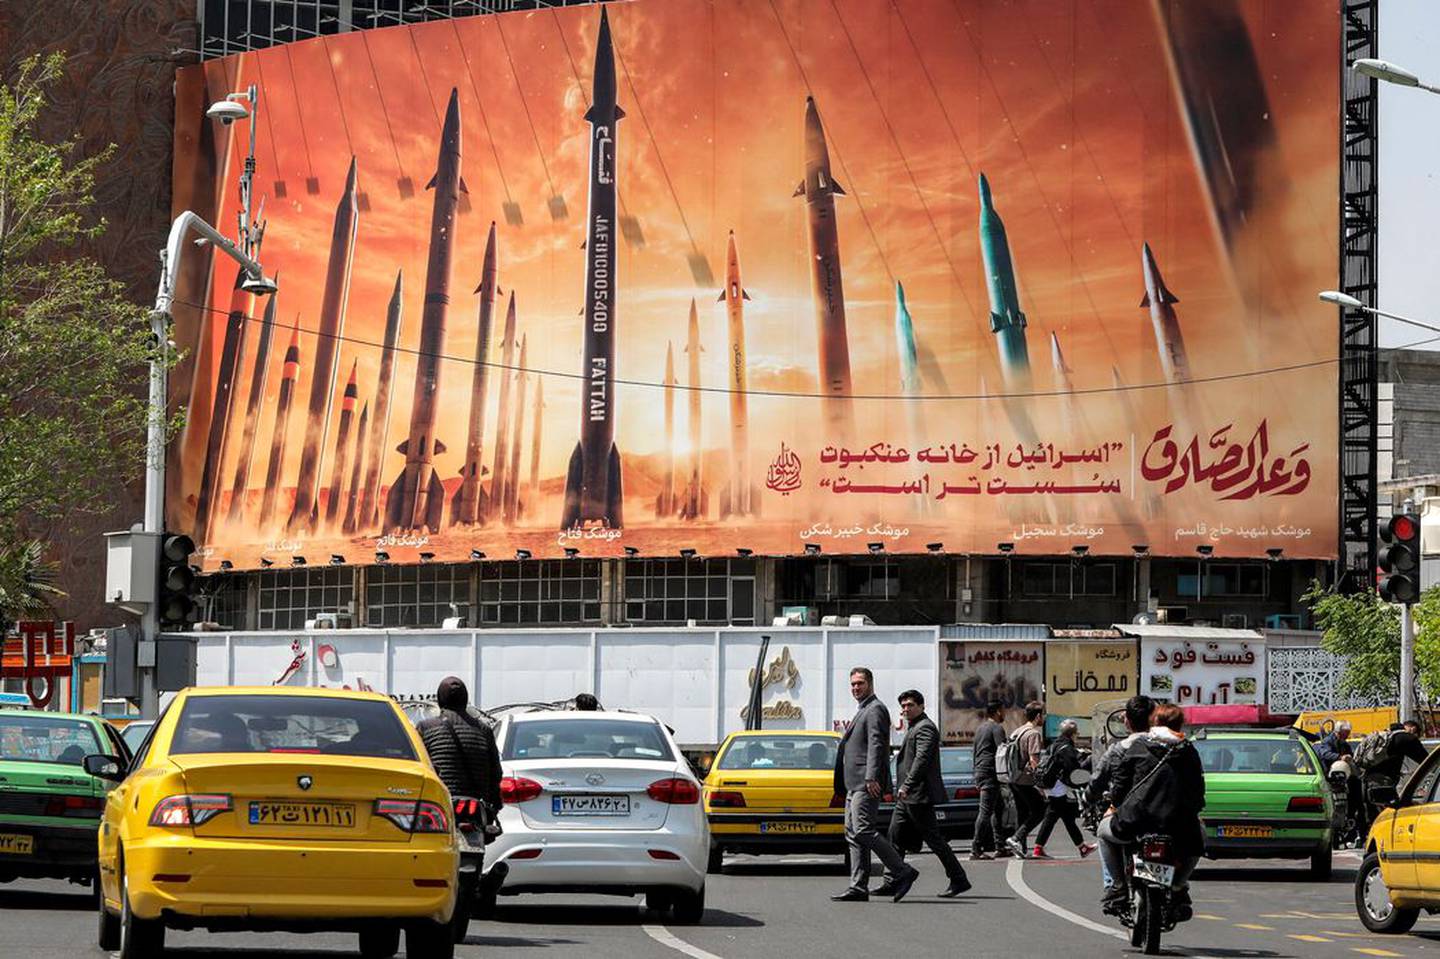 Iranian ballistic missiles are displayed on a billboard in central Tehran this week